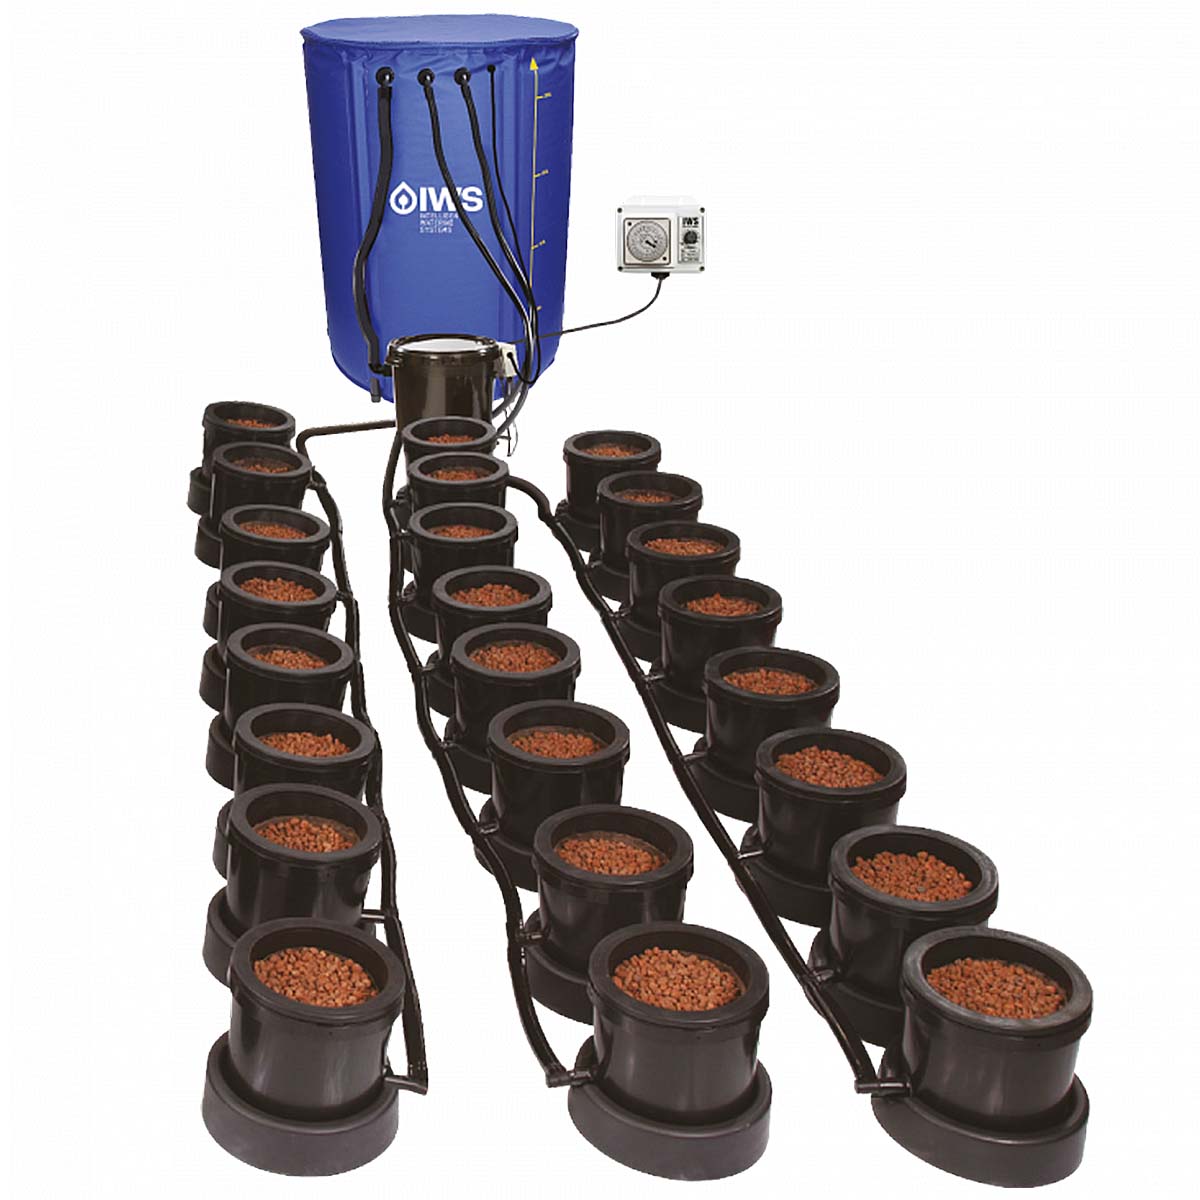 IWS Pro Flood & Drain Grow System with 10.5 Litre Punch Pots